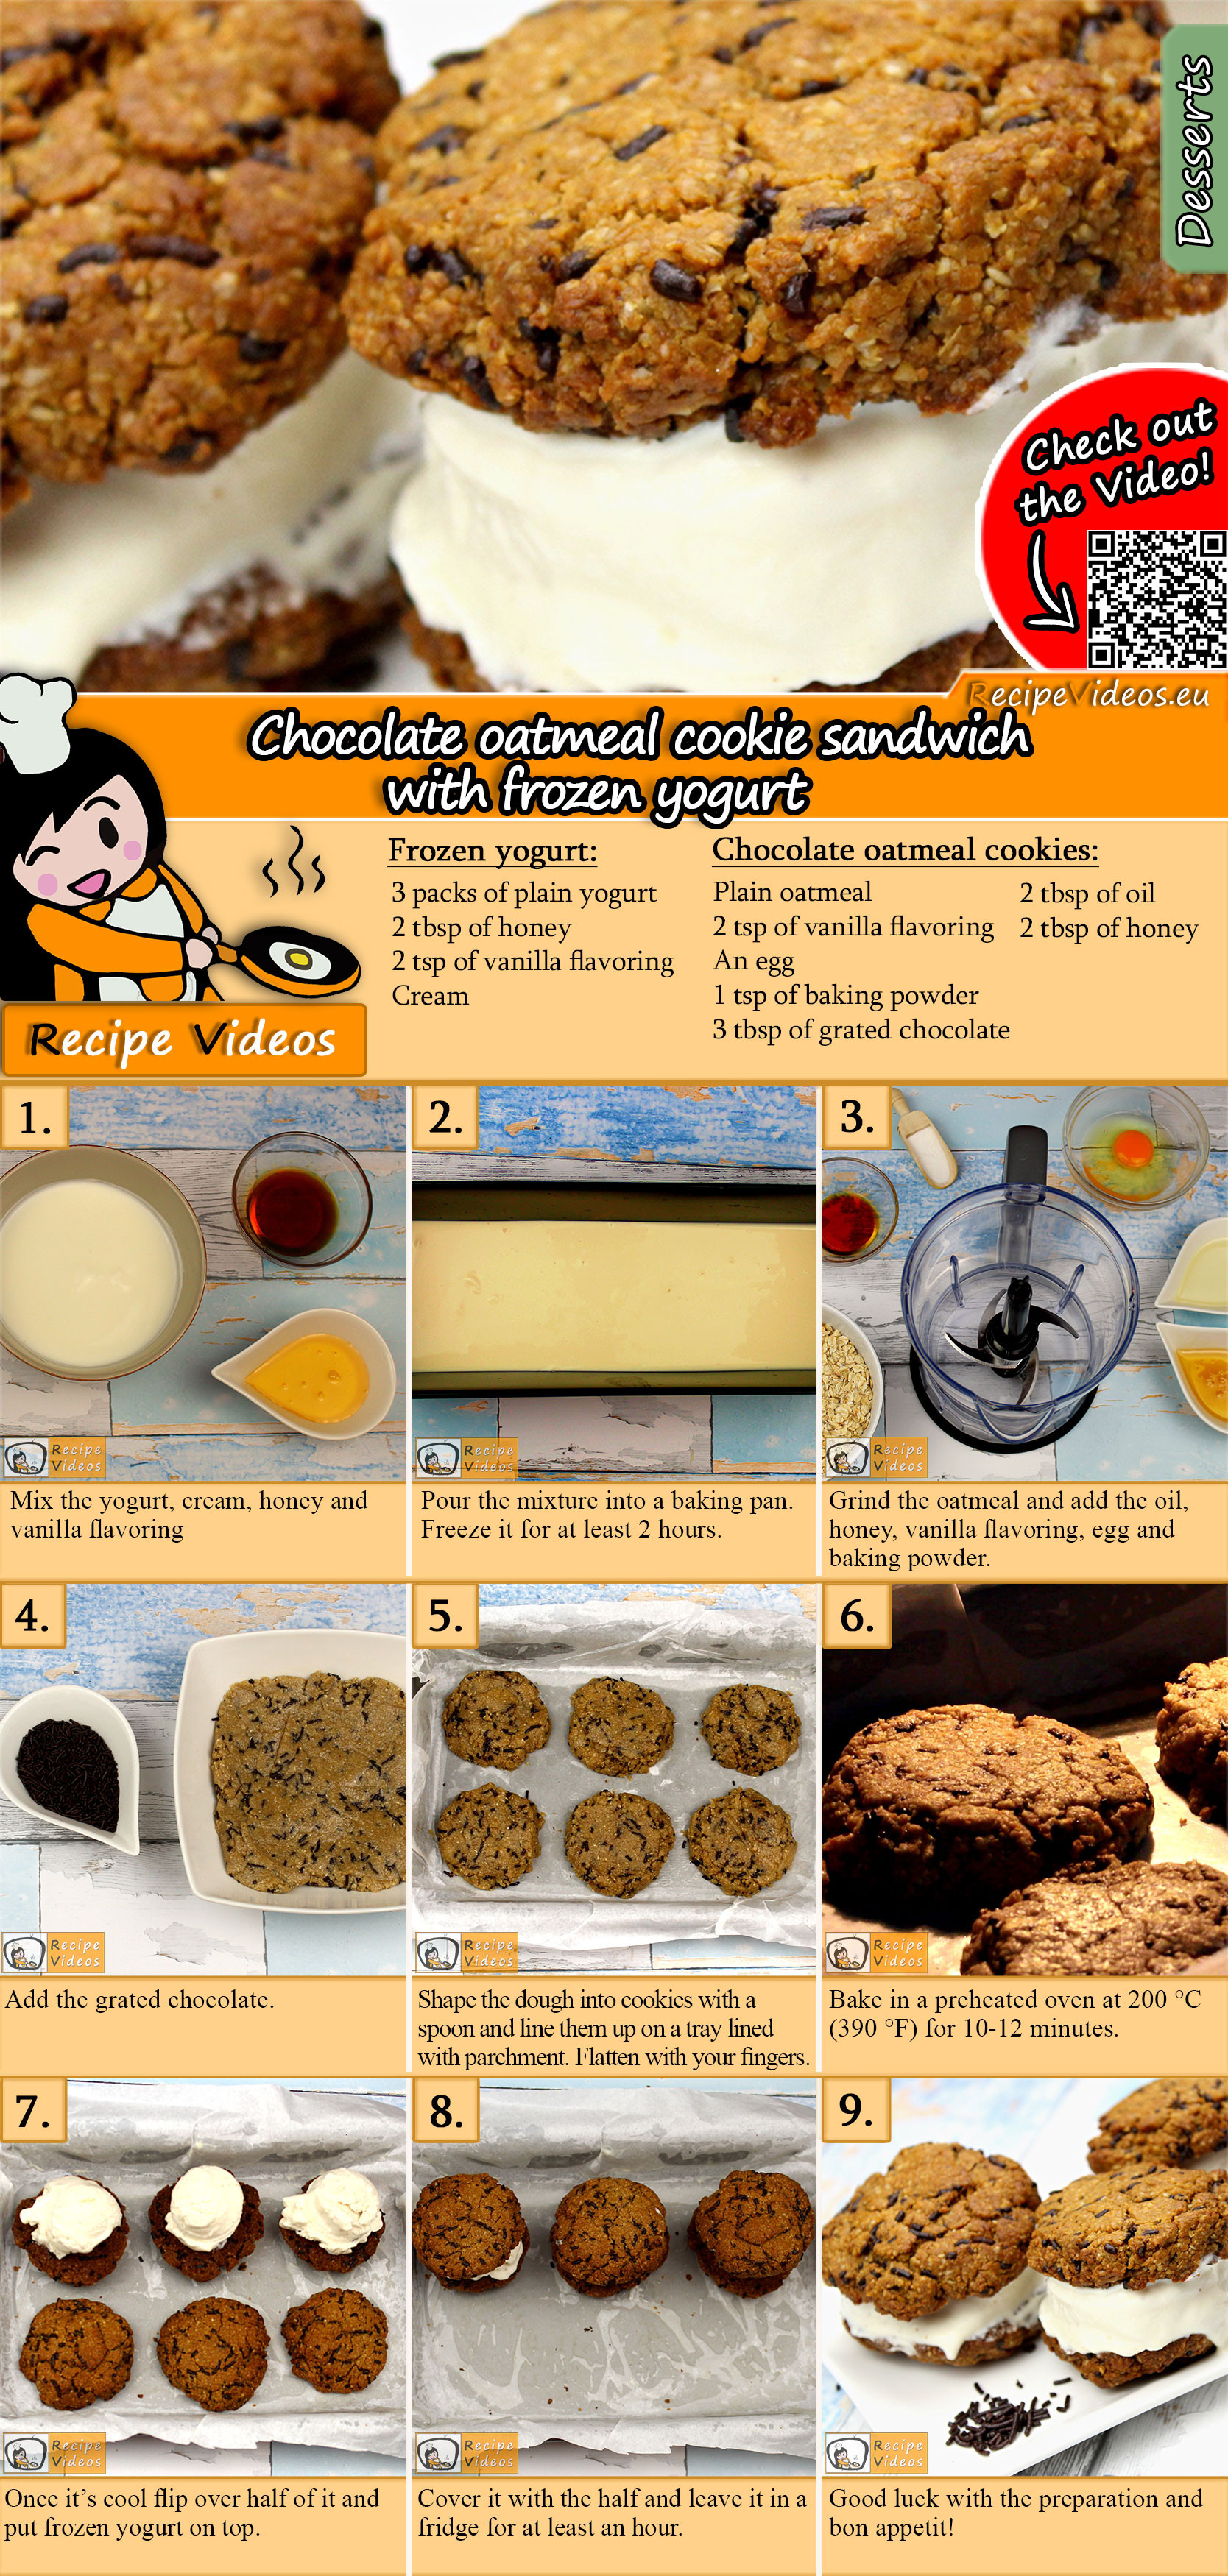 Chocolate oatmeal cookie sandwich with frozen yogurt recipe with video